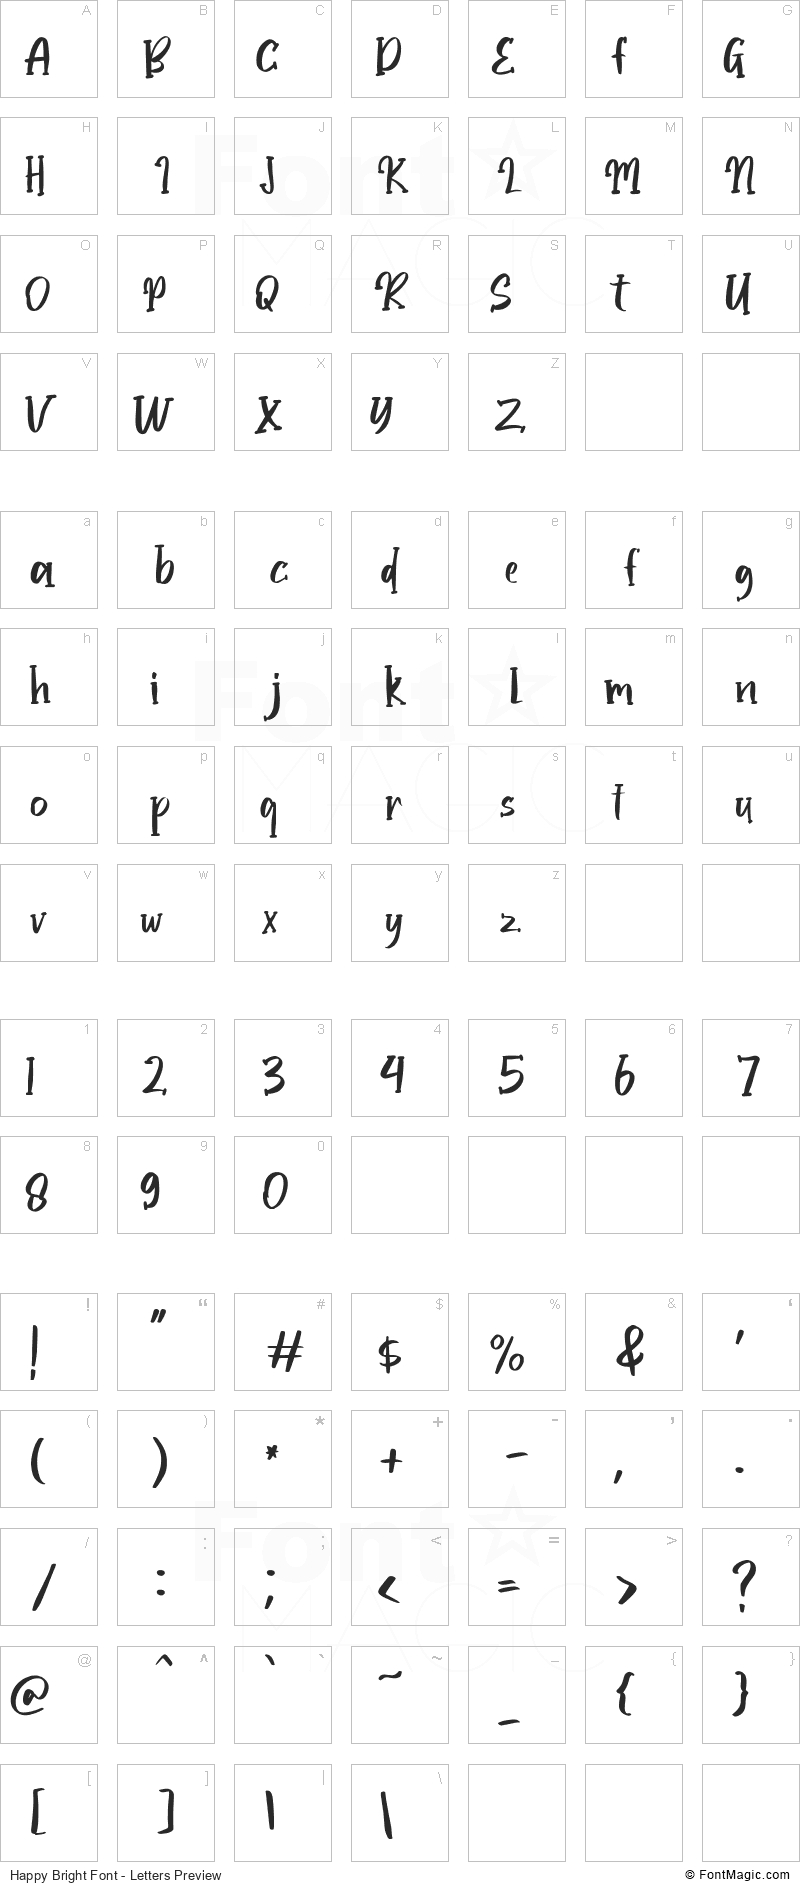 Happy Bright Font - All Latters Preview Chart